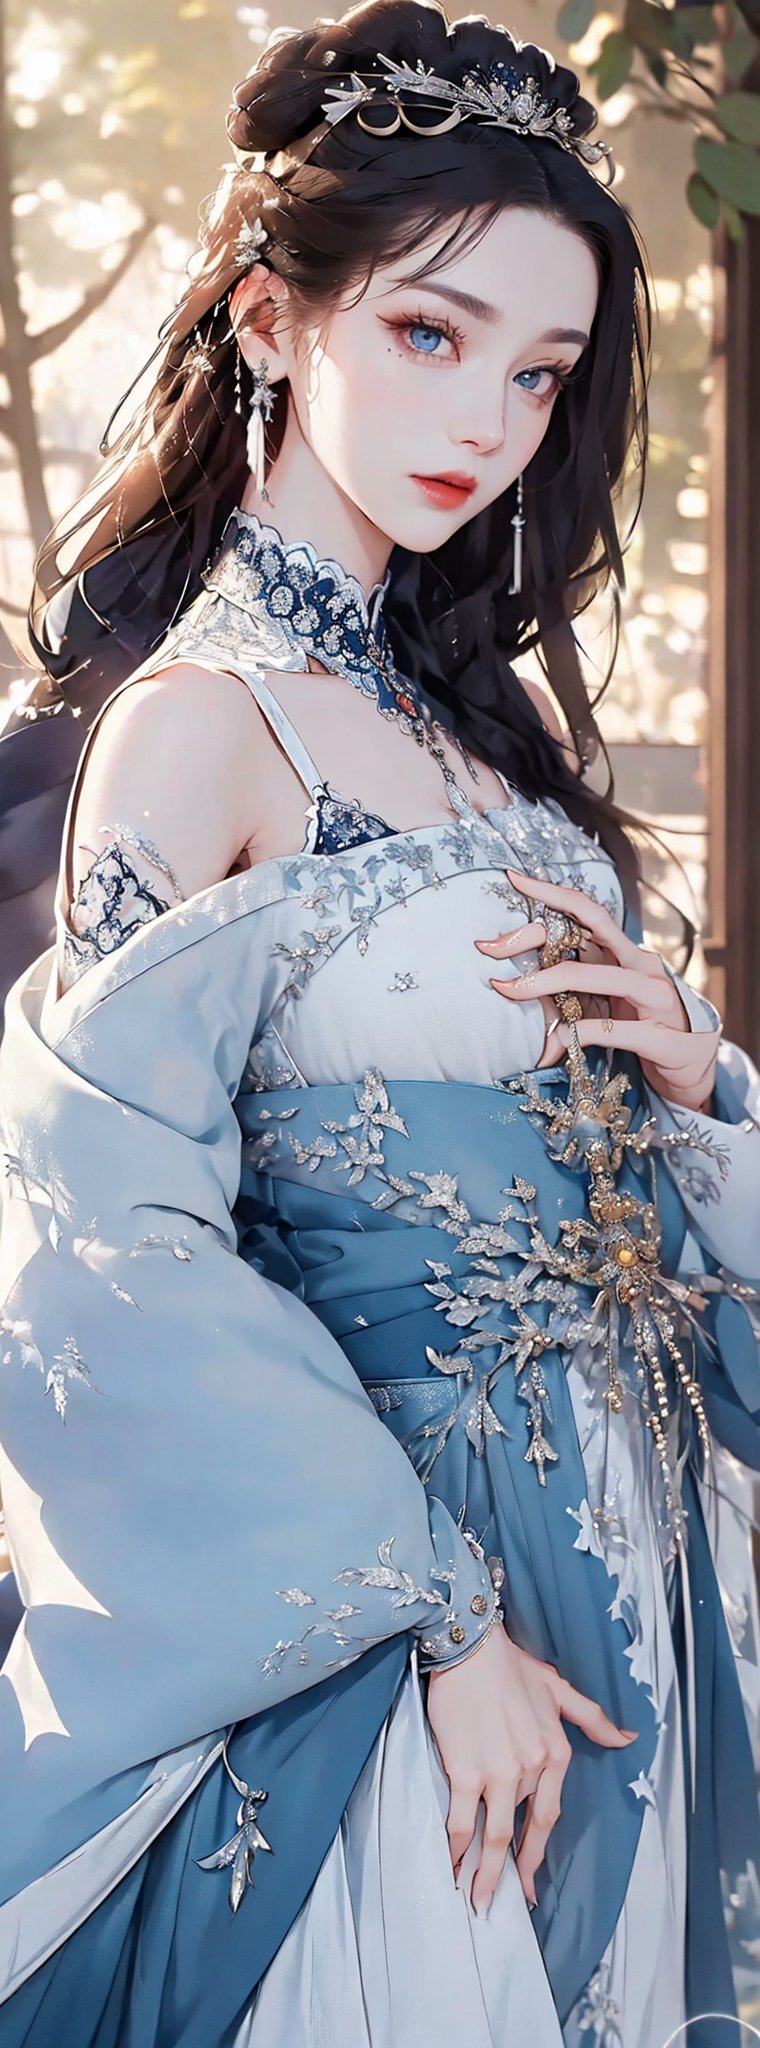 (Extremely detailed CG unified 8k wallpaper), ANCIENT_CHINESE_CASTLE_GARDEN_BACKGROUND, (((Masterpiece))), (((Best Quality))), ((Super Detailed)), (Best Illustration), (Best Shading), ( (Extremely exquisite and beautiful)), embodying the charm of ancient princesses, exuding beauty, sexiness and charm, with natural big breasts. Mesmerizing eyes convey mystery and seduction. Elegant and charming, with a slender figure and full of mystery. Off the shoulders, low cut. Ancient traditional Hanfu decorated with intricate patterns or ornate details. Seductive and elegant pose, beautyniji,ancient_beautiful,huoshen,asuka